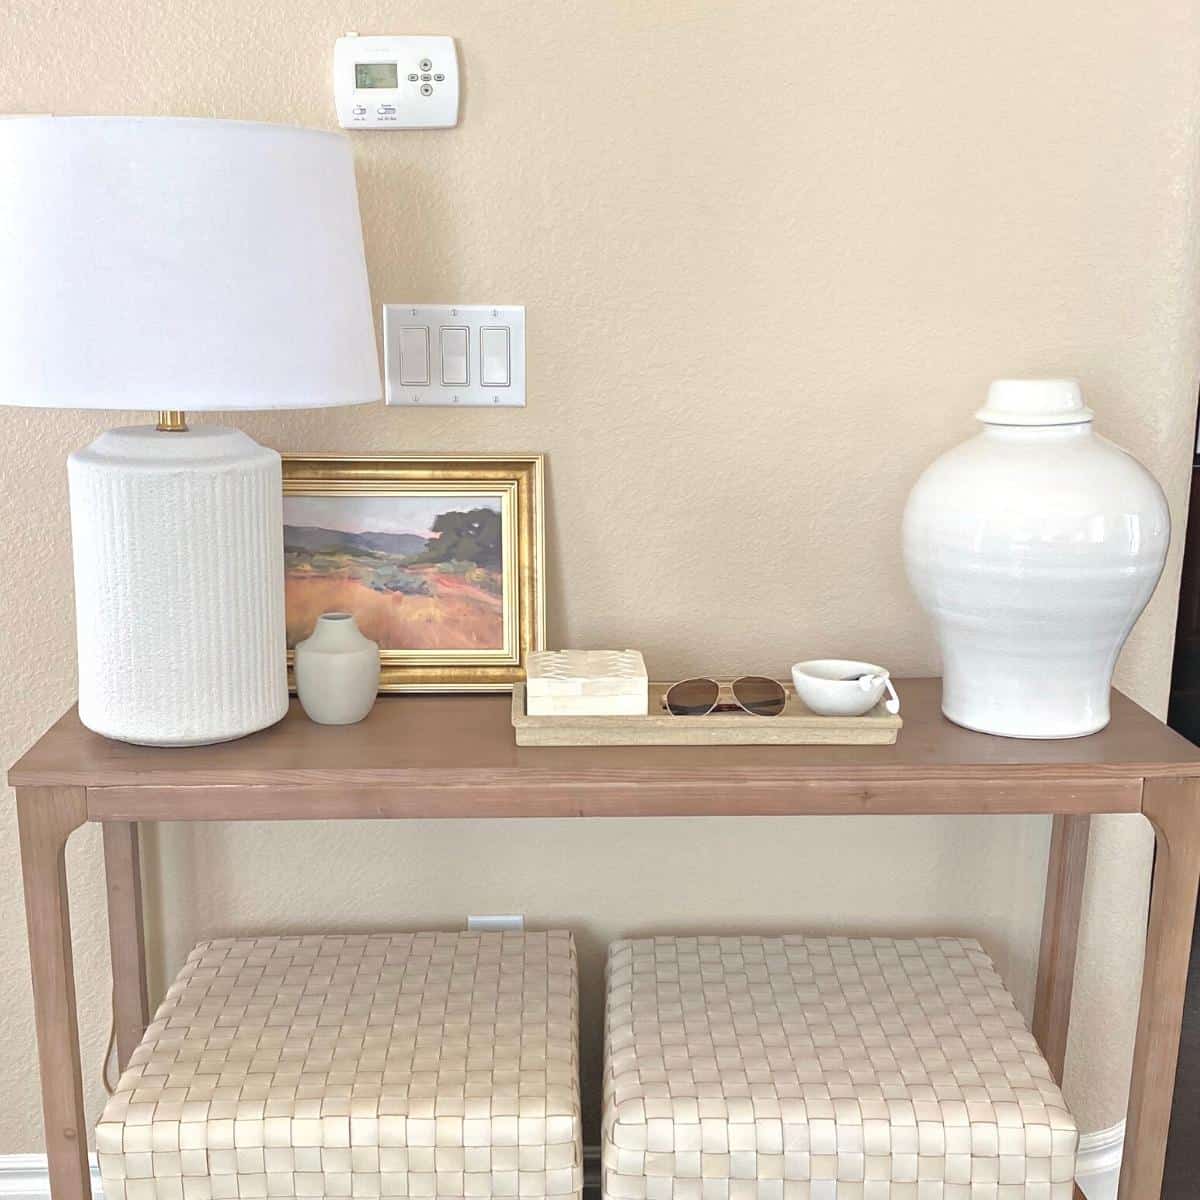 Console table styled with a white textured lamp on the left, small framed art and a tray of home decor accessories in the middle and a large white vase on the right